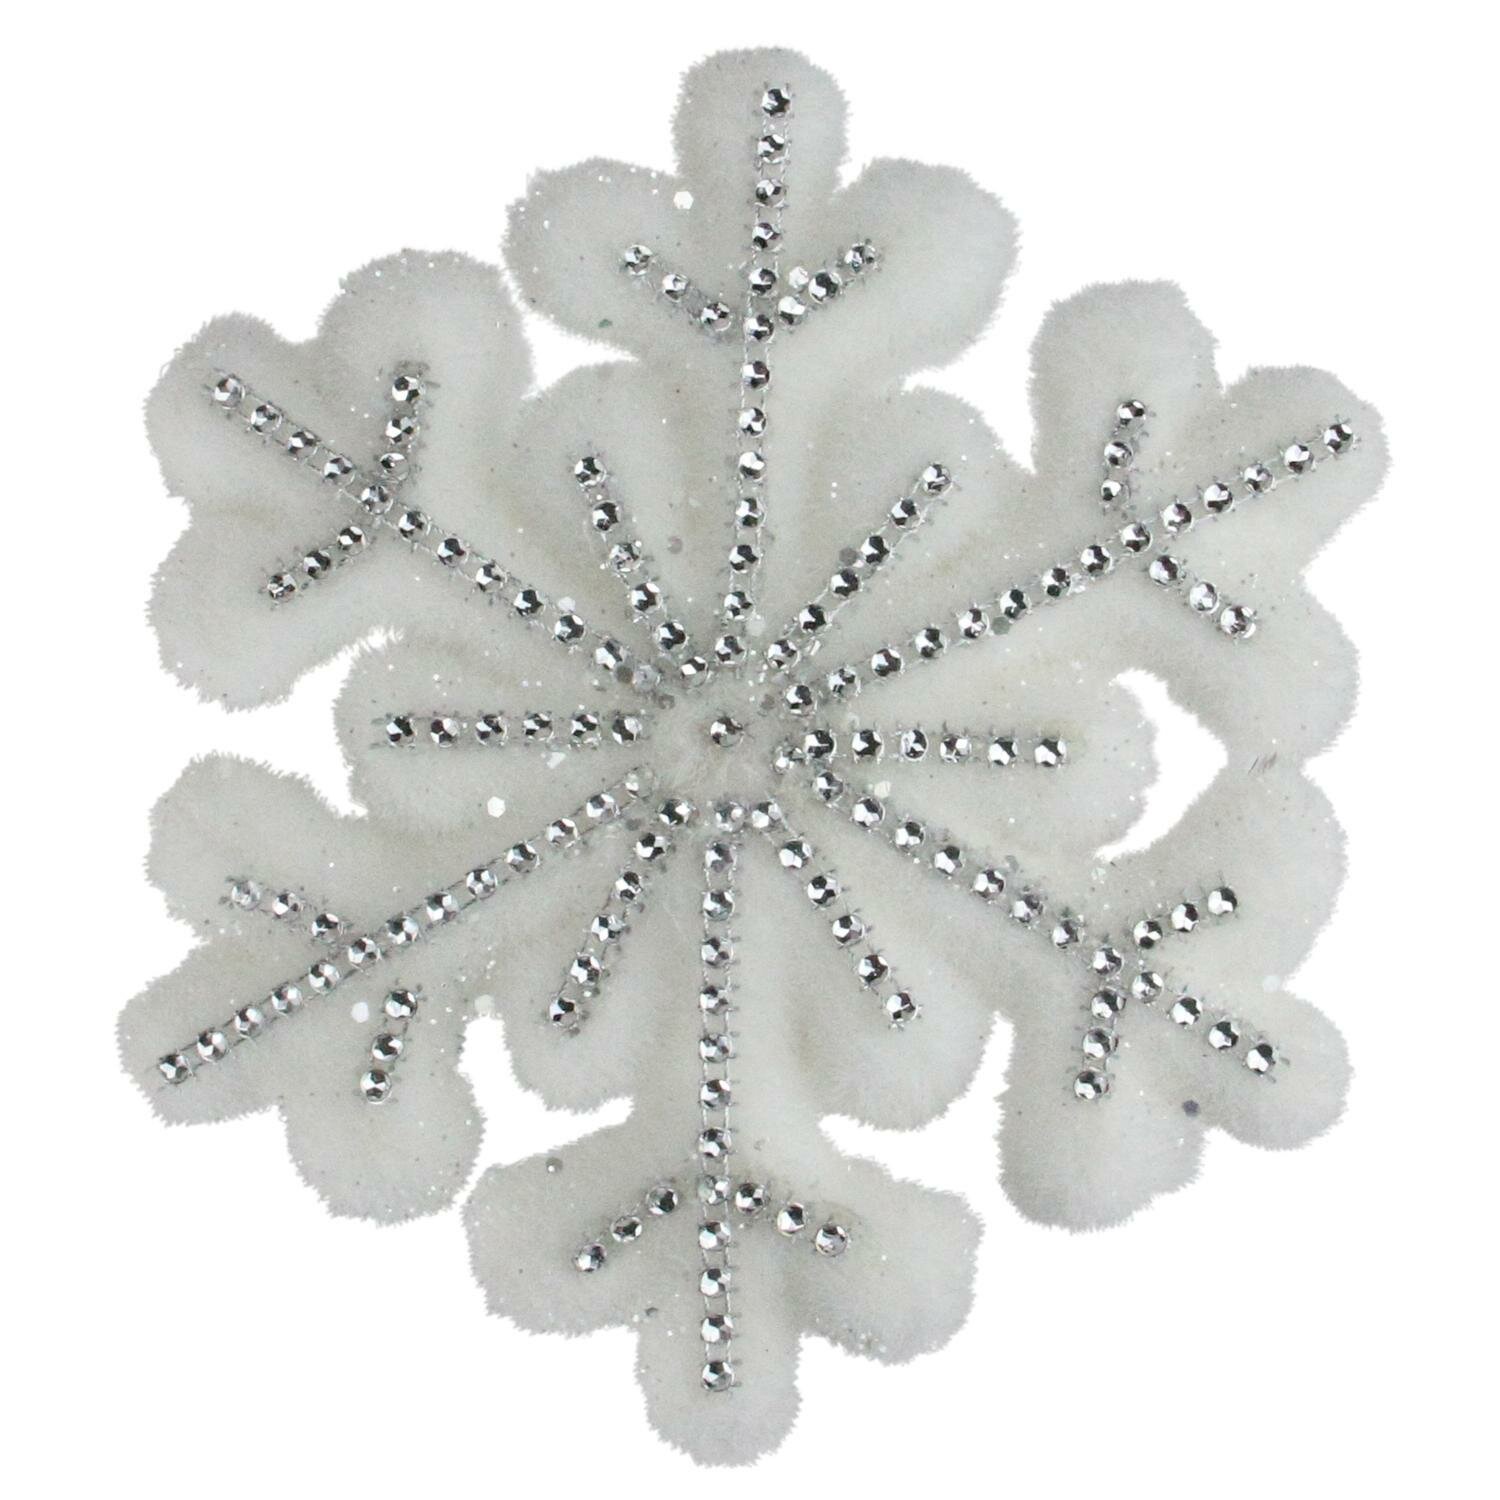 Christmas Decorations for Office Christmas Snowflake Hanging Decoration Garland Ornaments for Xmas Winter Wonderland Holiday Party Decor CHRORINE Winter Snowflake Swirls Decorations 30 Pcs